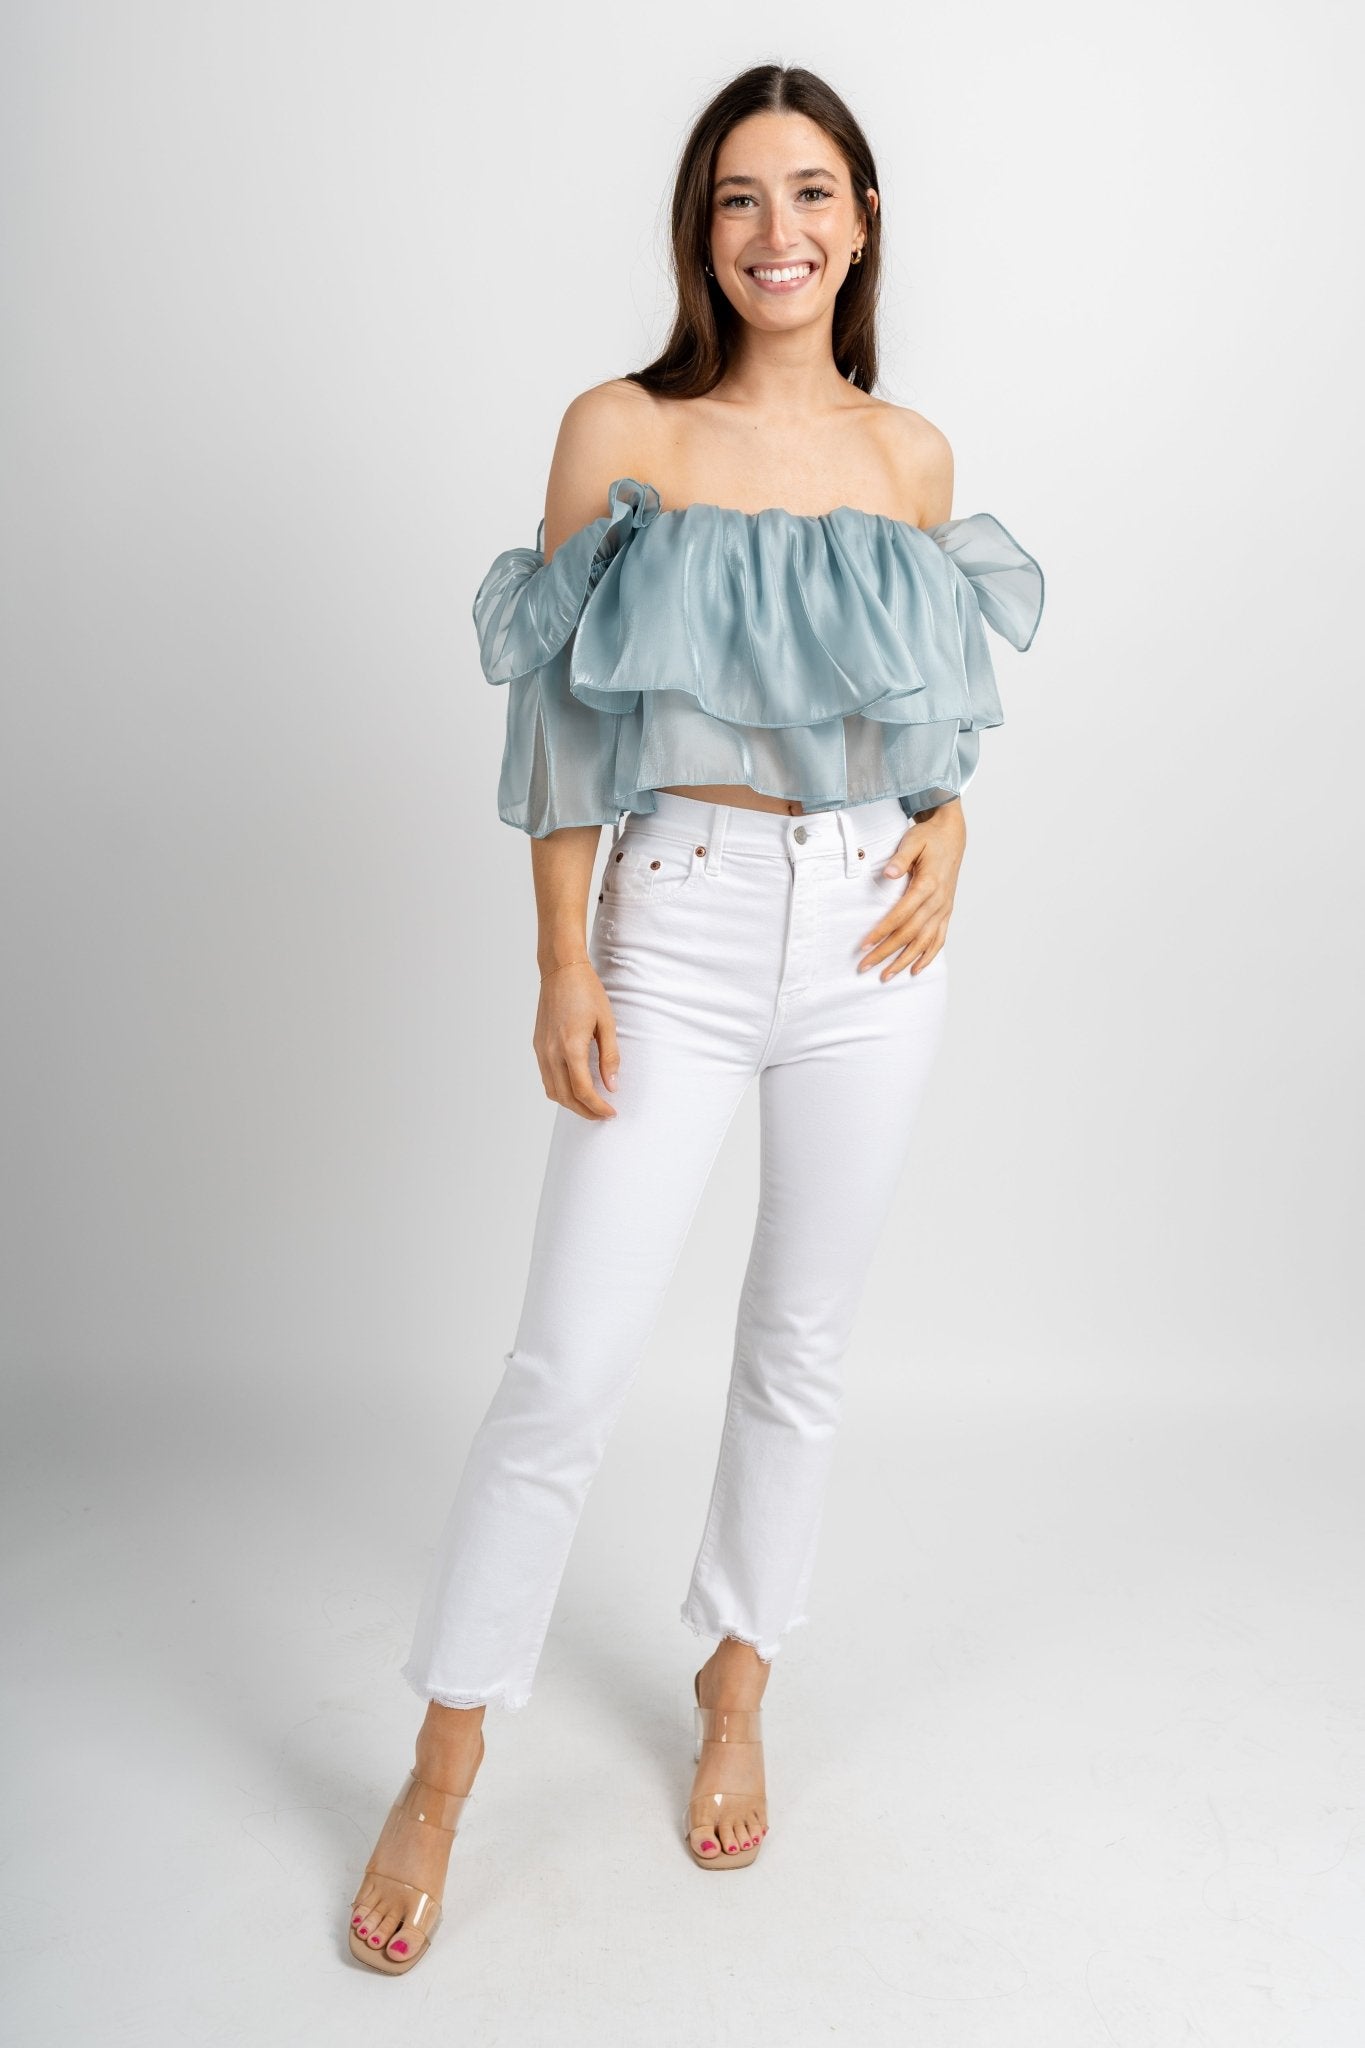 Ruffle off shoulder top dusty blue - Affordable Top - Unique Easter Style at Lush Fashion Lounge Boutique in Oklahoma